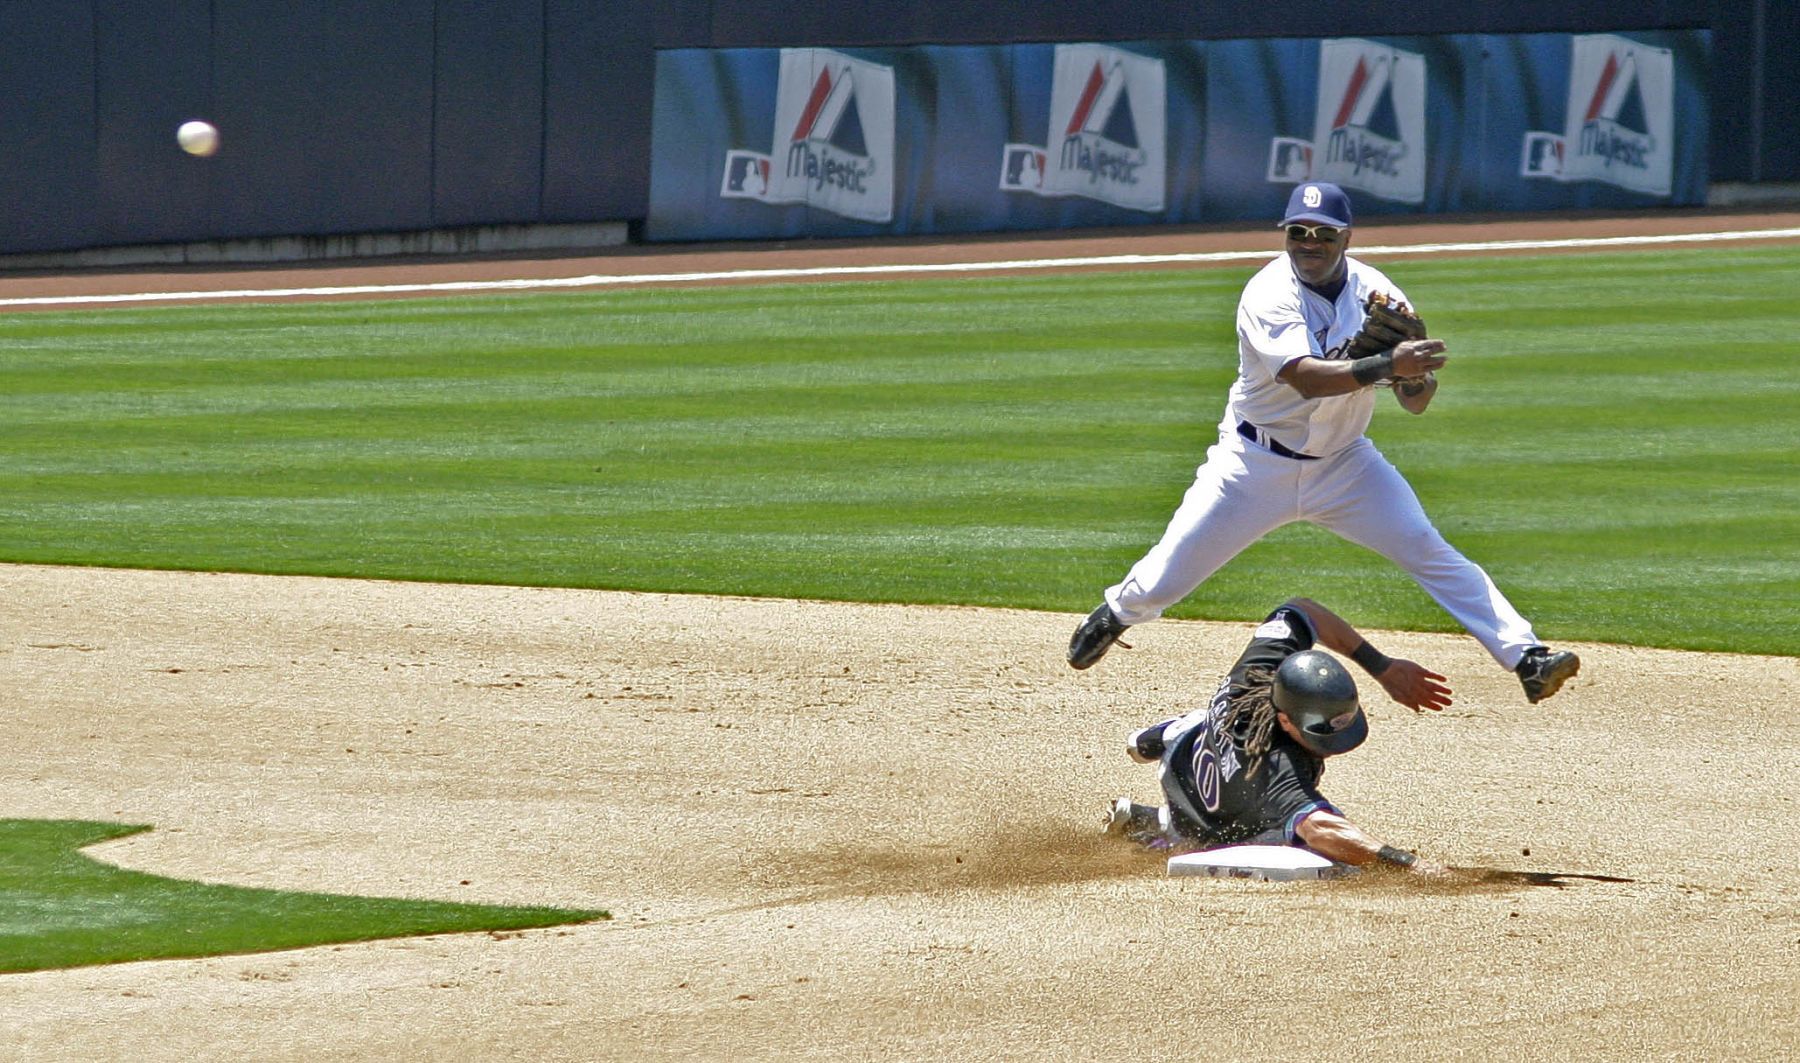 Eric Young double play